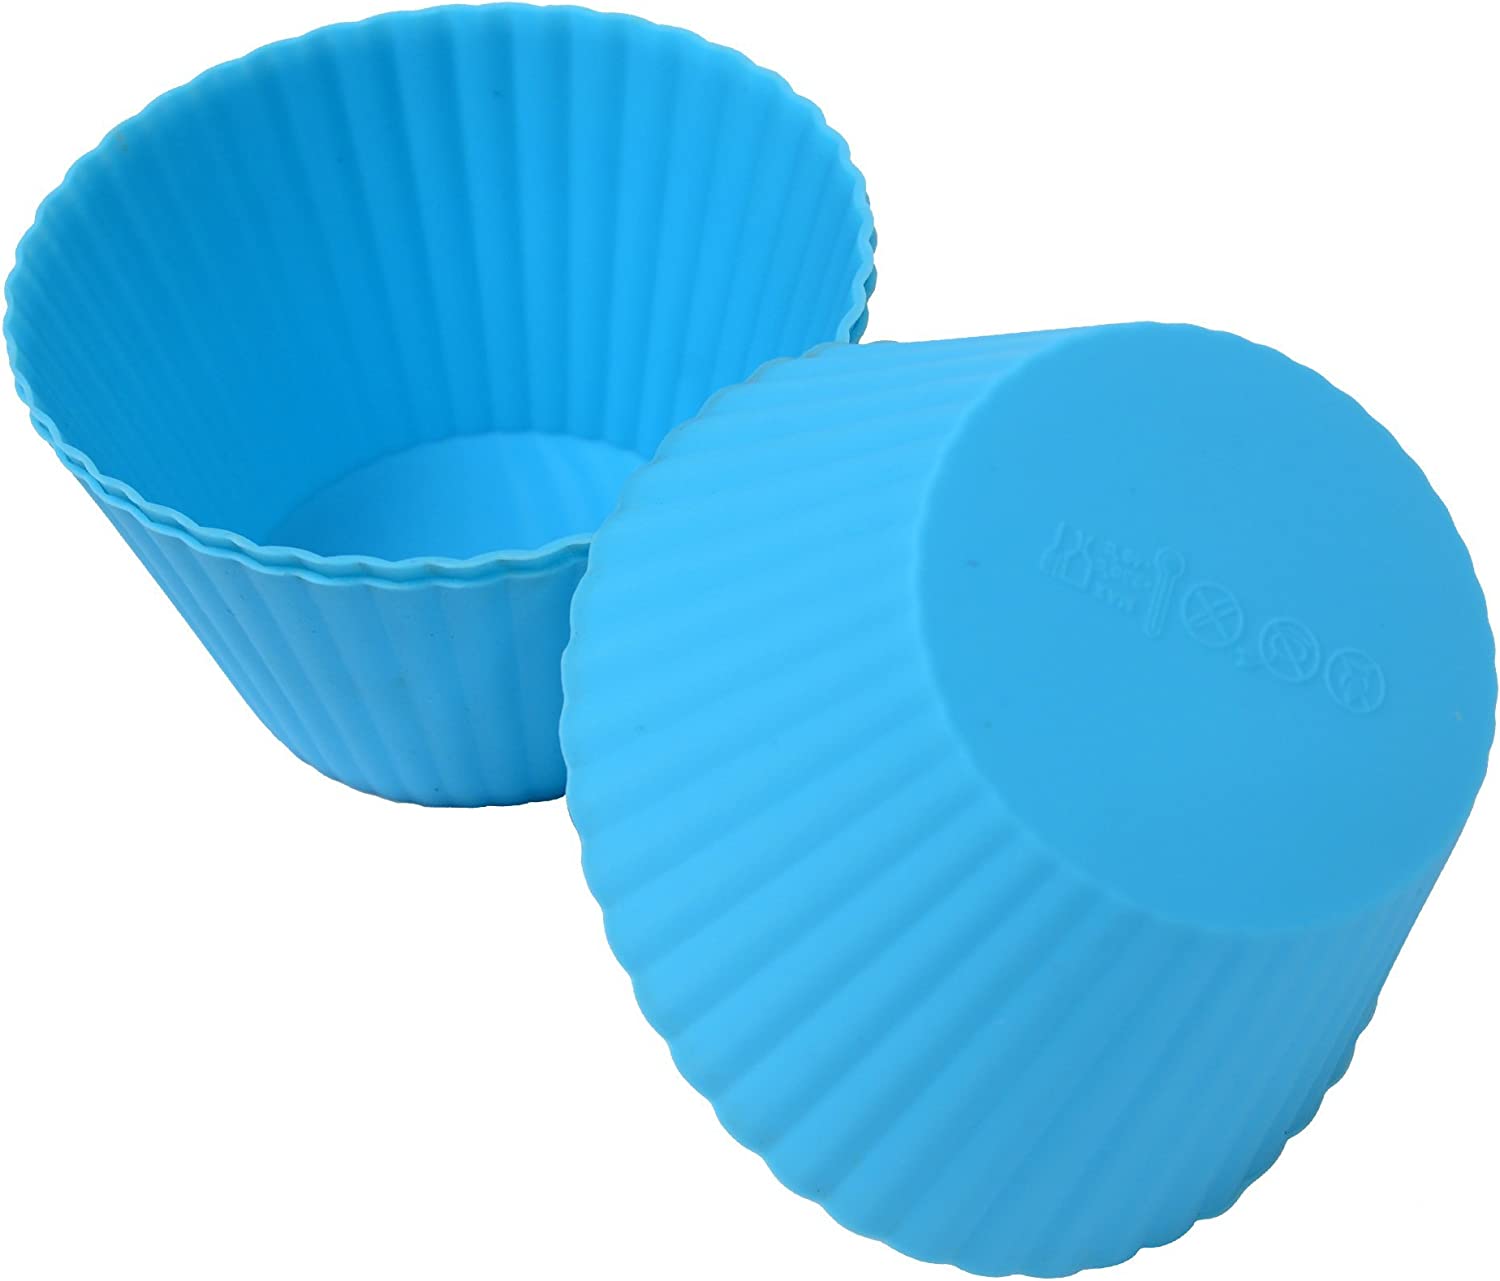 Large Silicone Baking Cups 12 Pack Jumbo Muffin Cup Liners Large